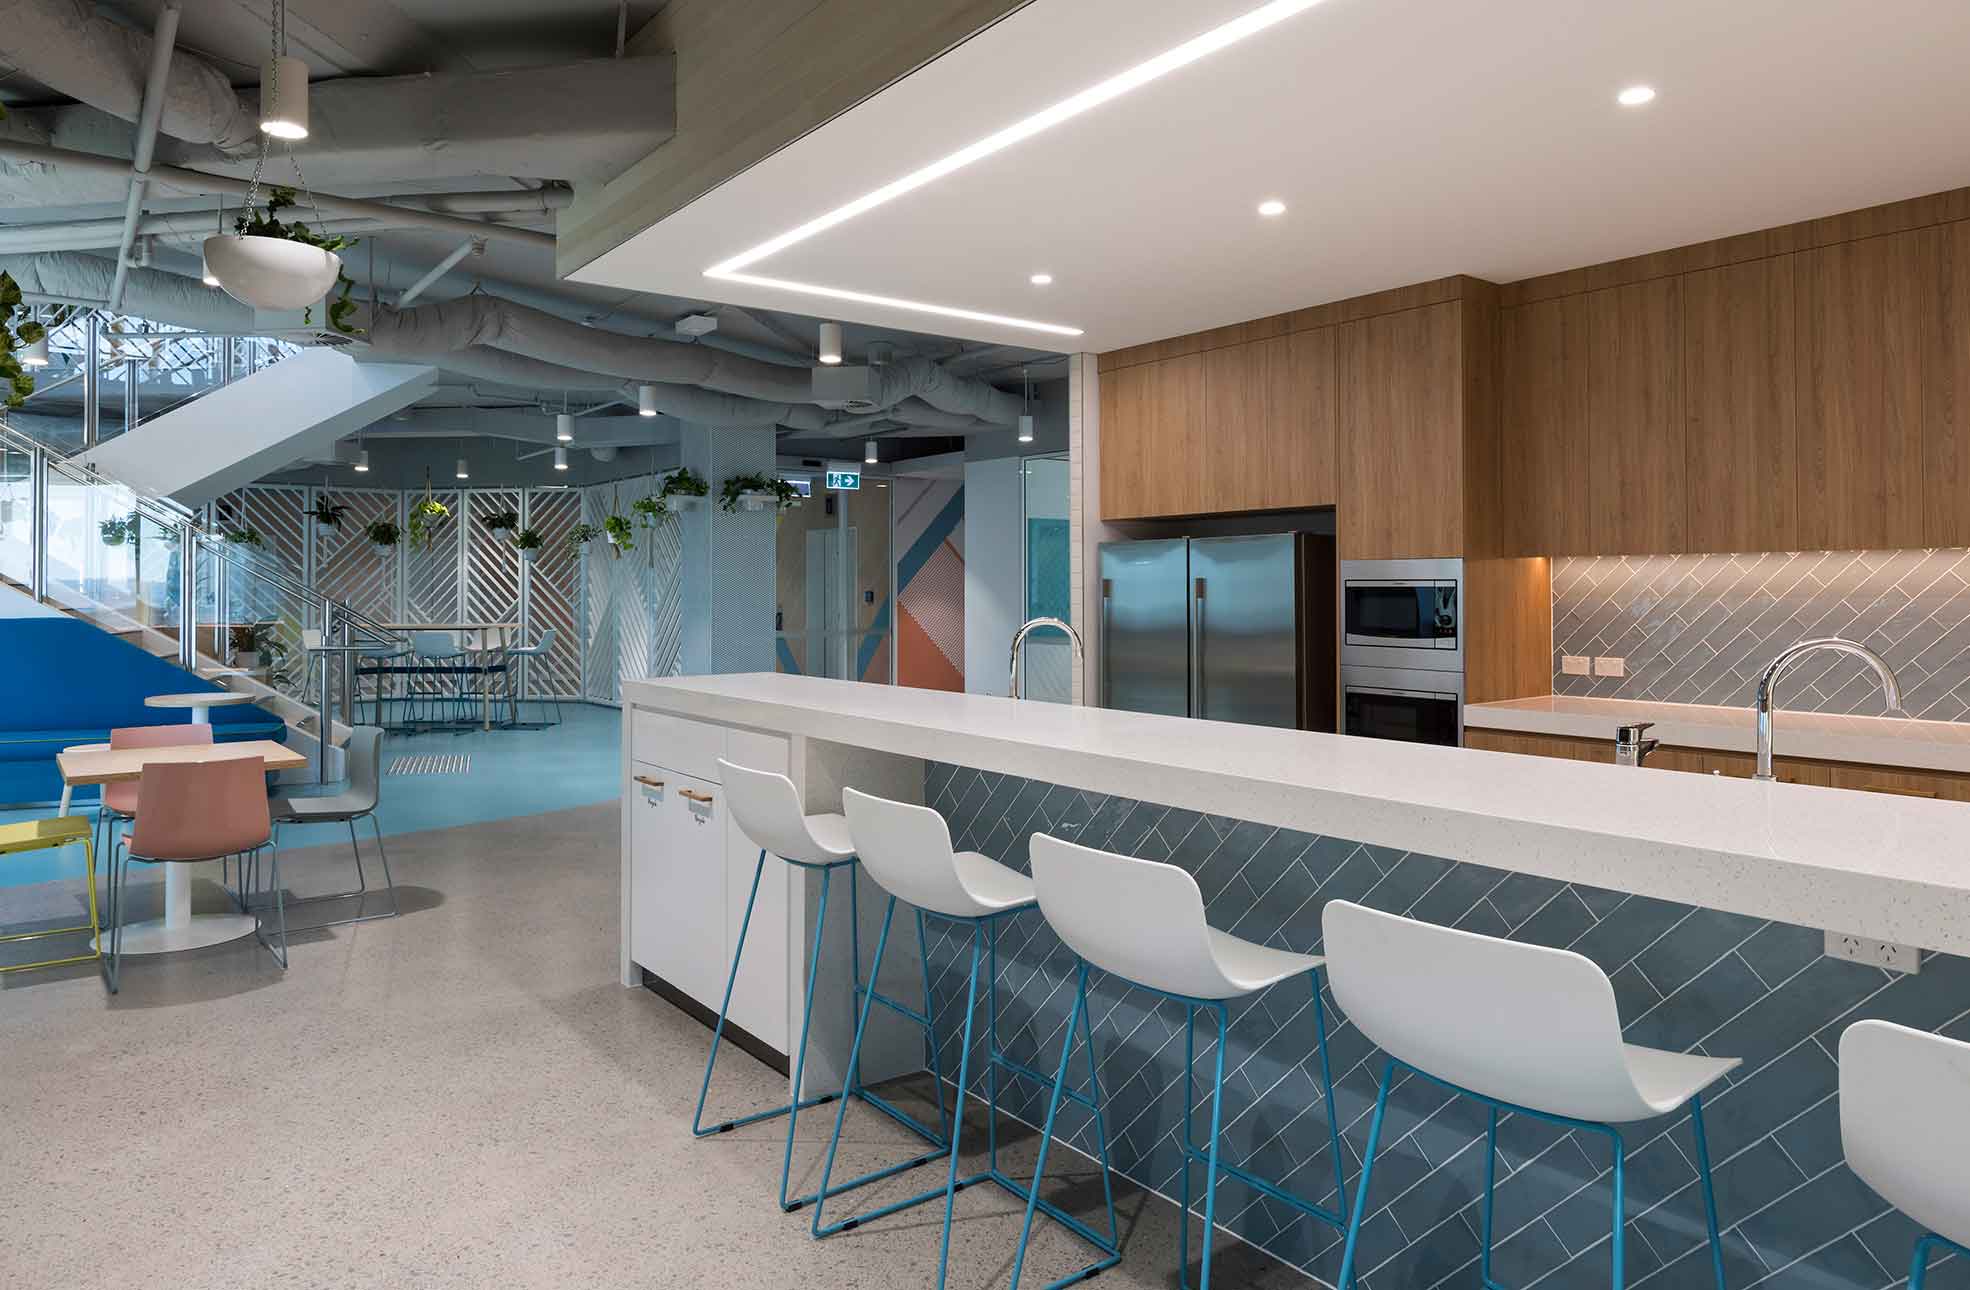 Modern commercial fit out solution kitchen bar, stools, breakout areas, stairs to offices.